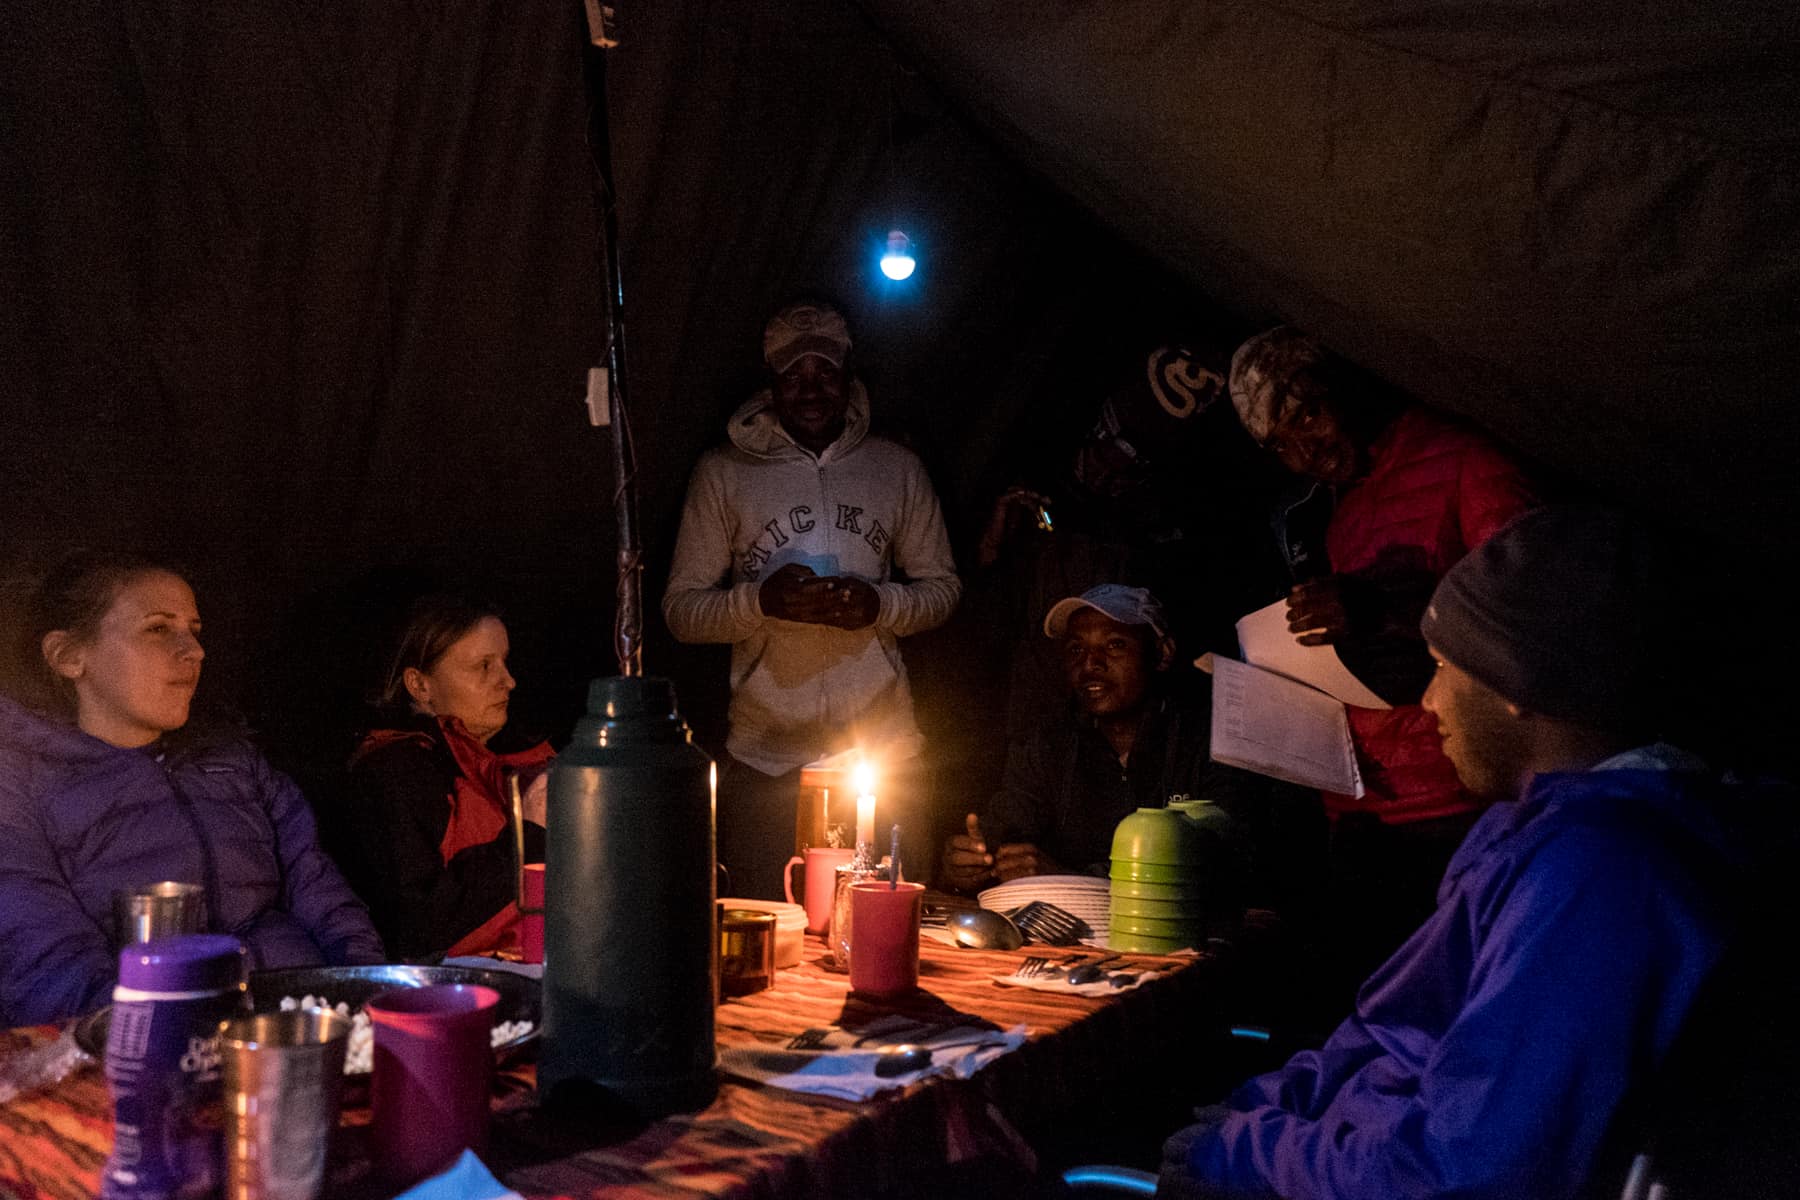 A group of Kilimanjaro trekkers sit round a table in a tent at night, while four guides give a briefing